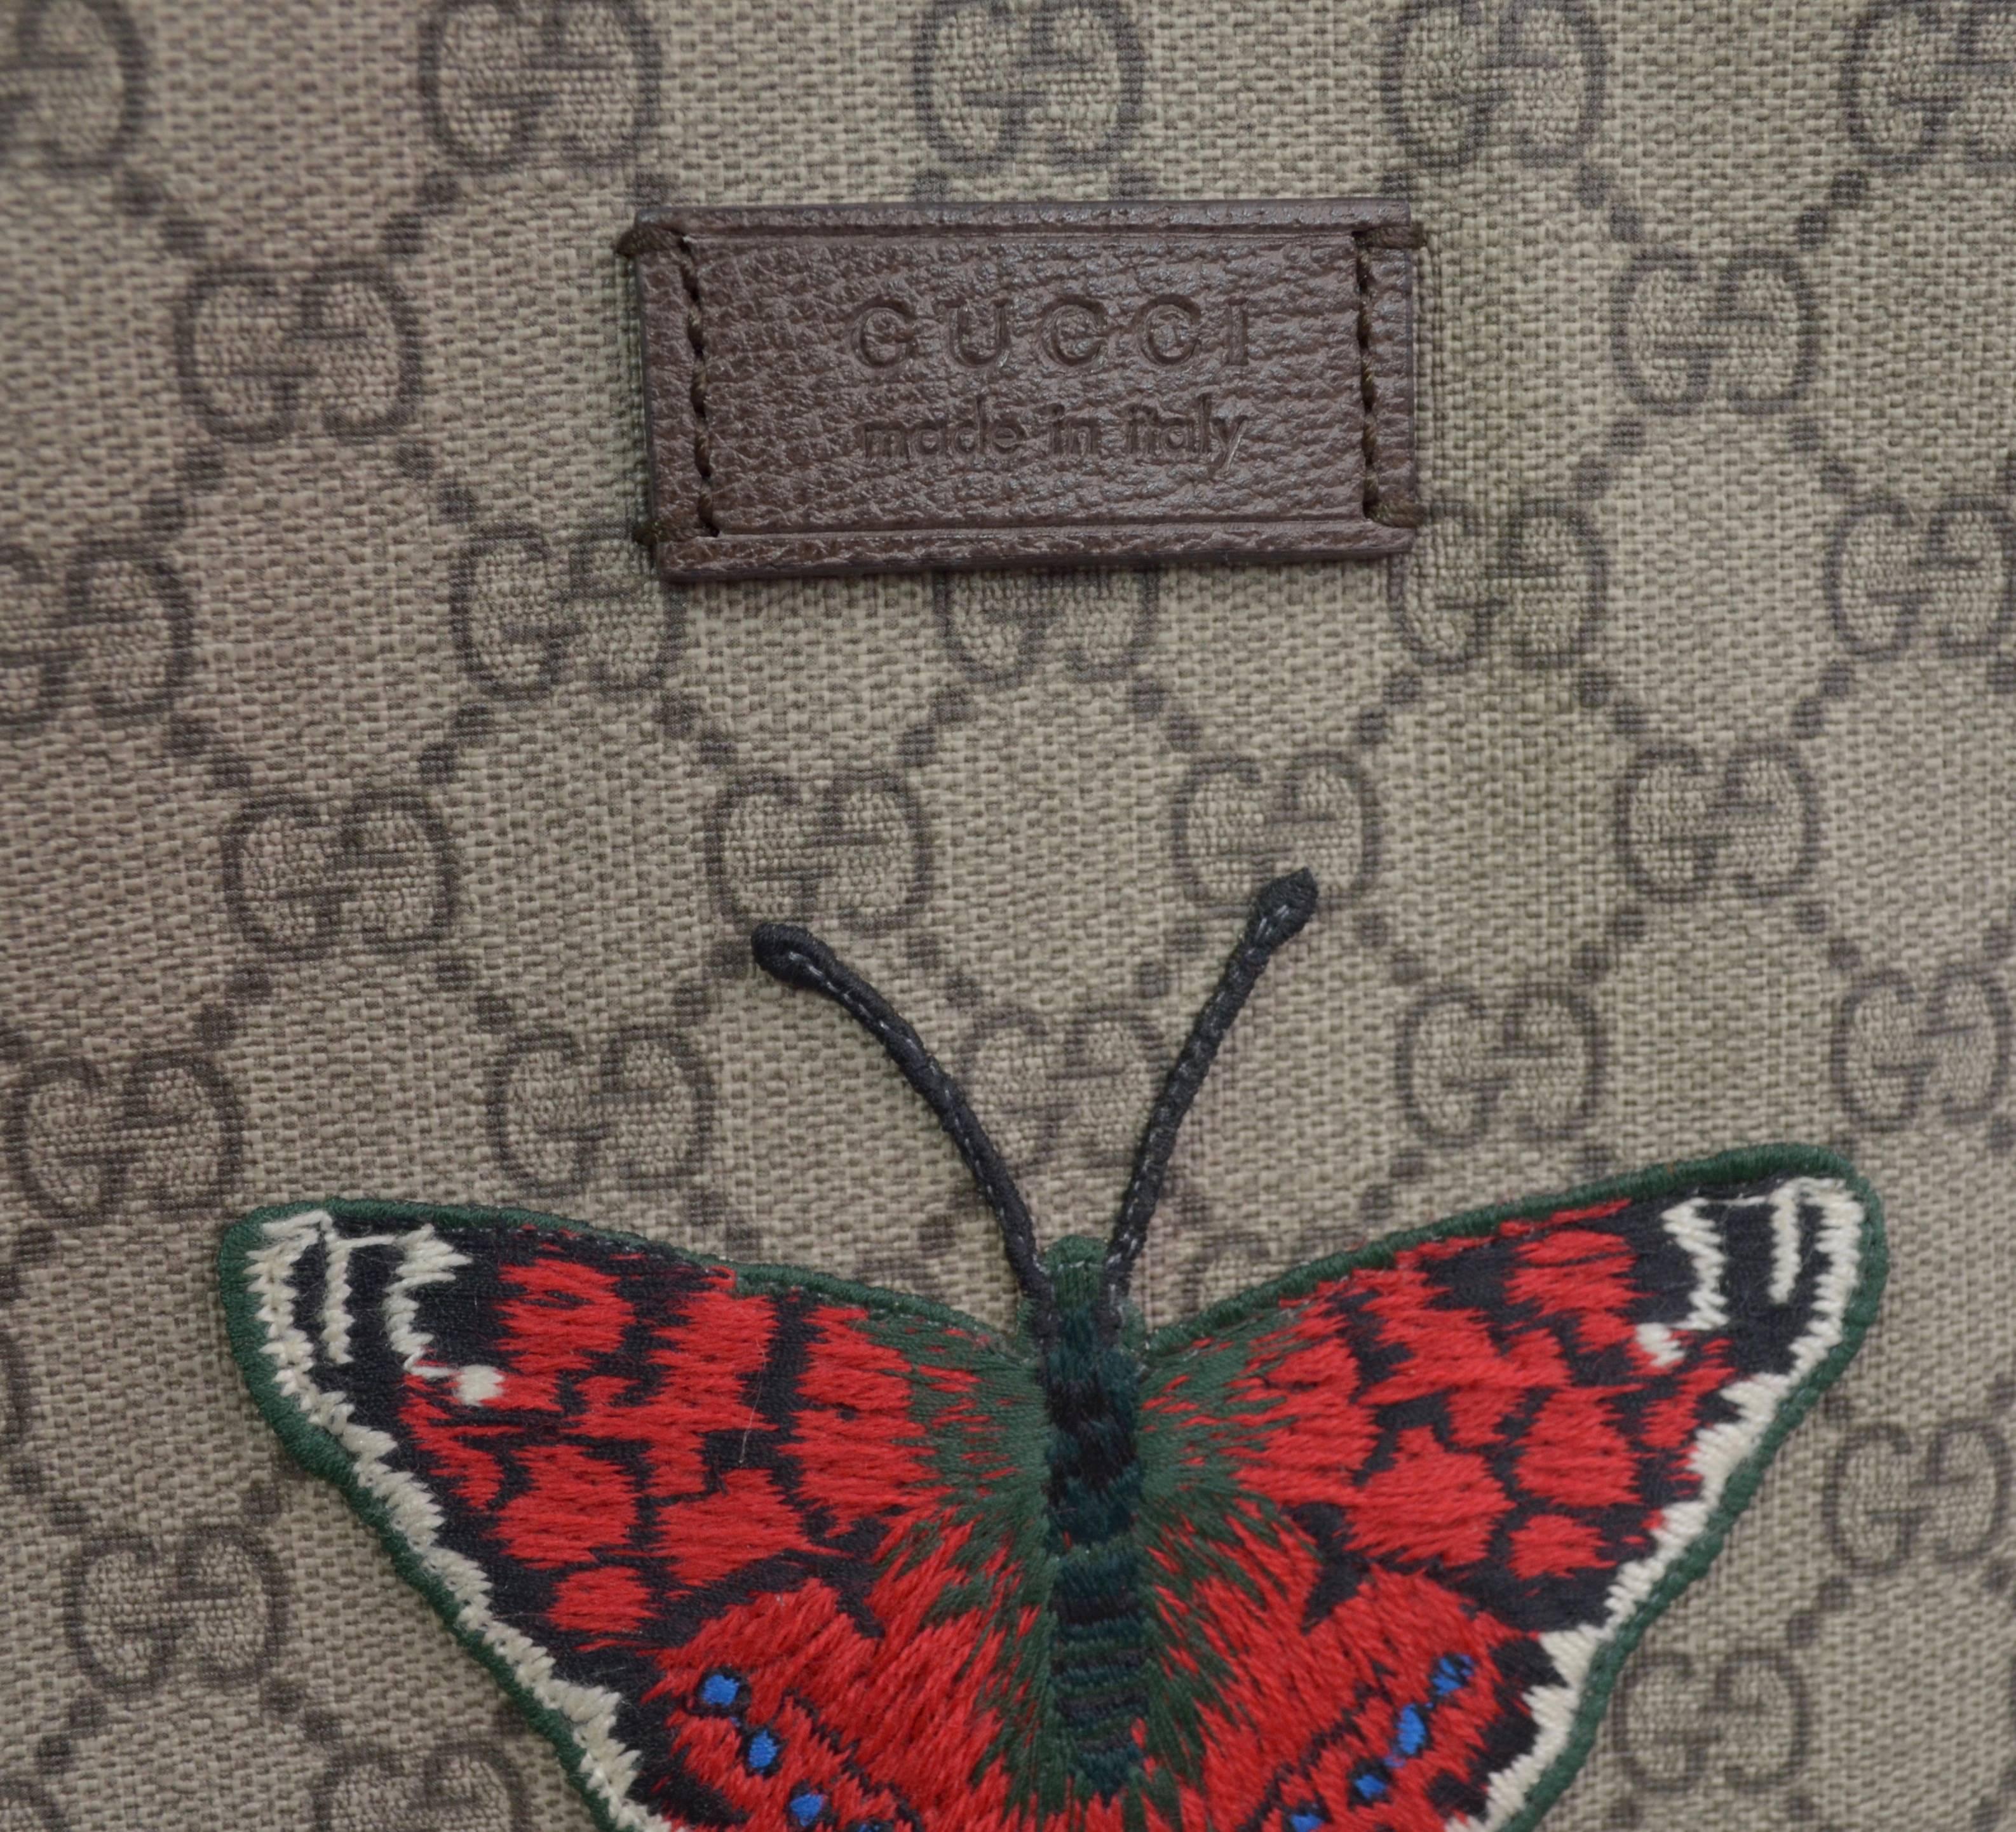 Gucci Supreme Embroidered Butterfly Tote 2016/7 2